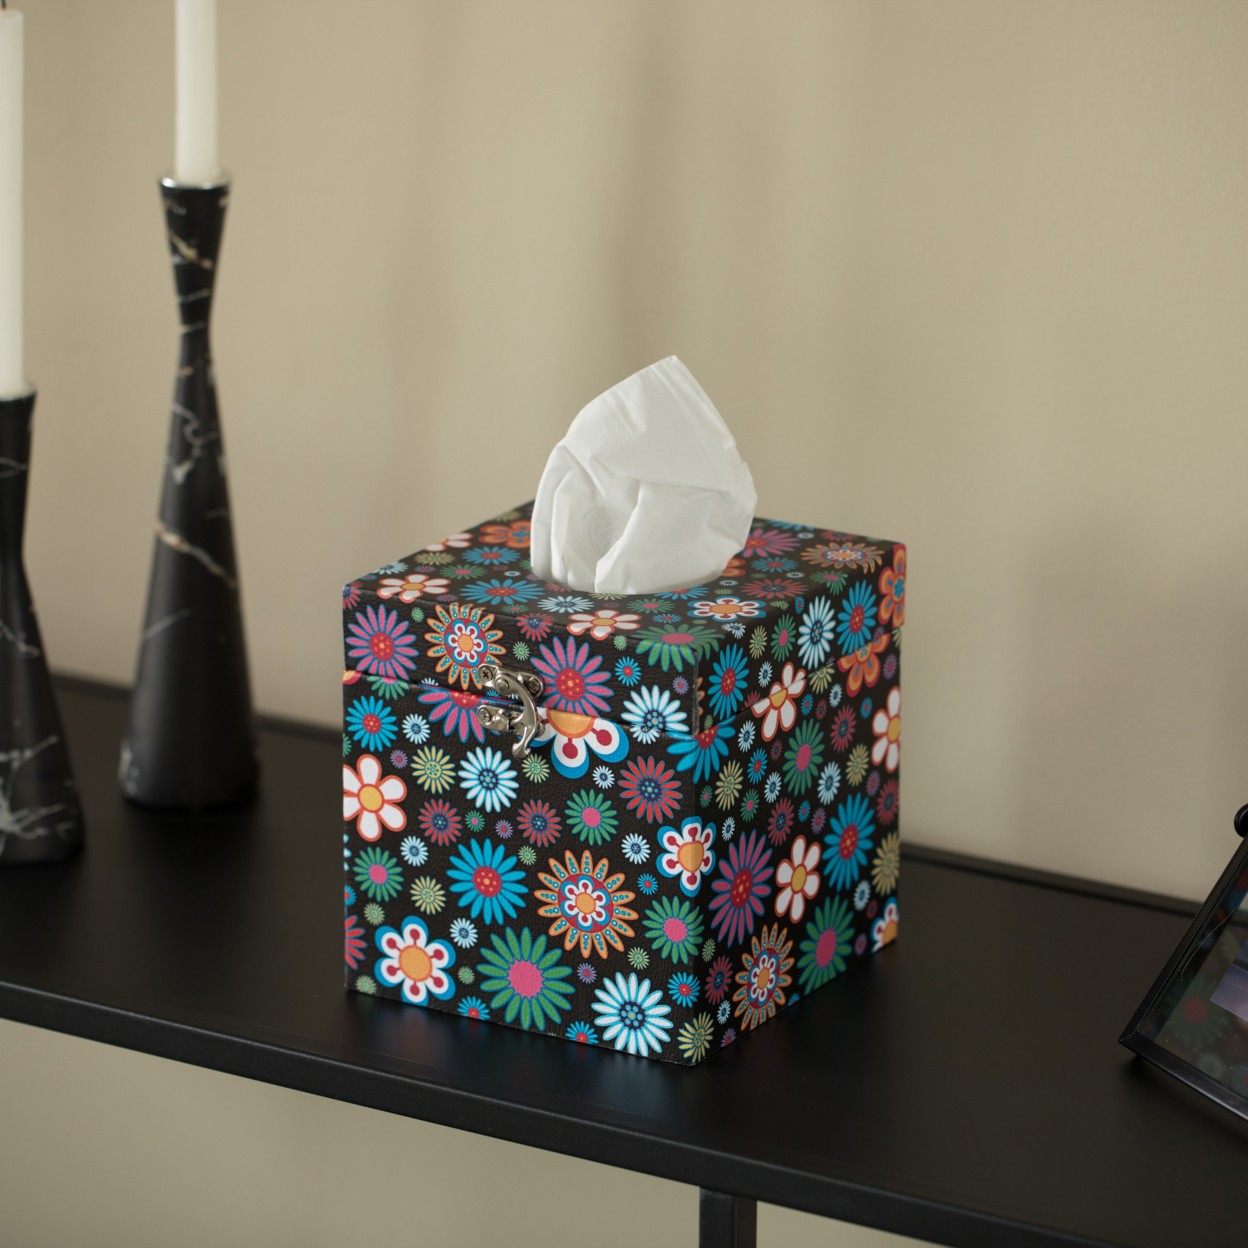 Facial Tissue Box Holder For Your Bathroom, Office, Or Vanity With Decorative Floral Design - Rectangle